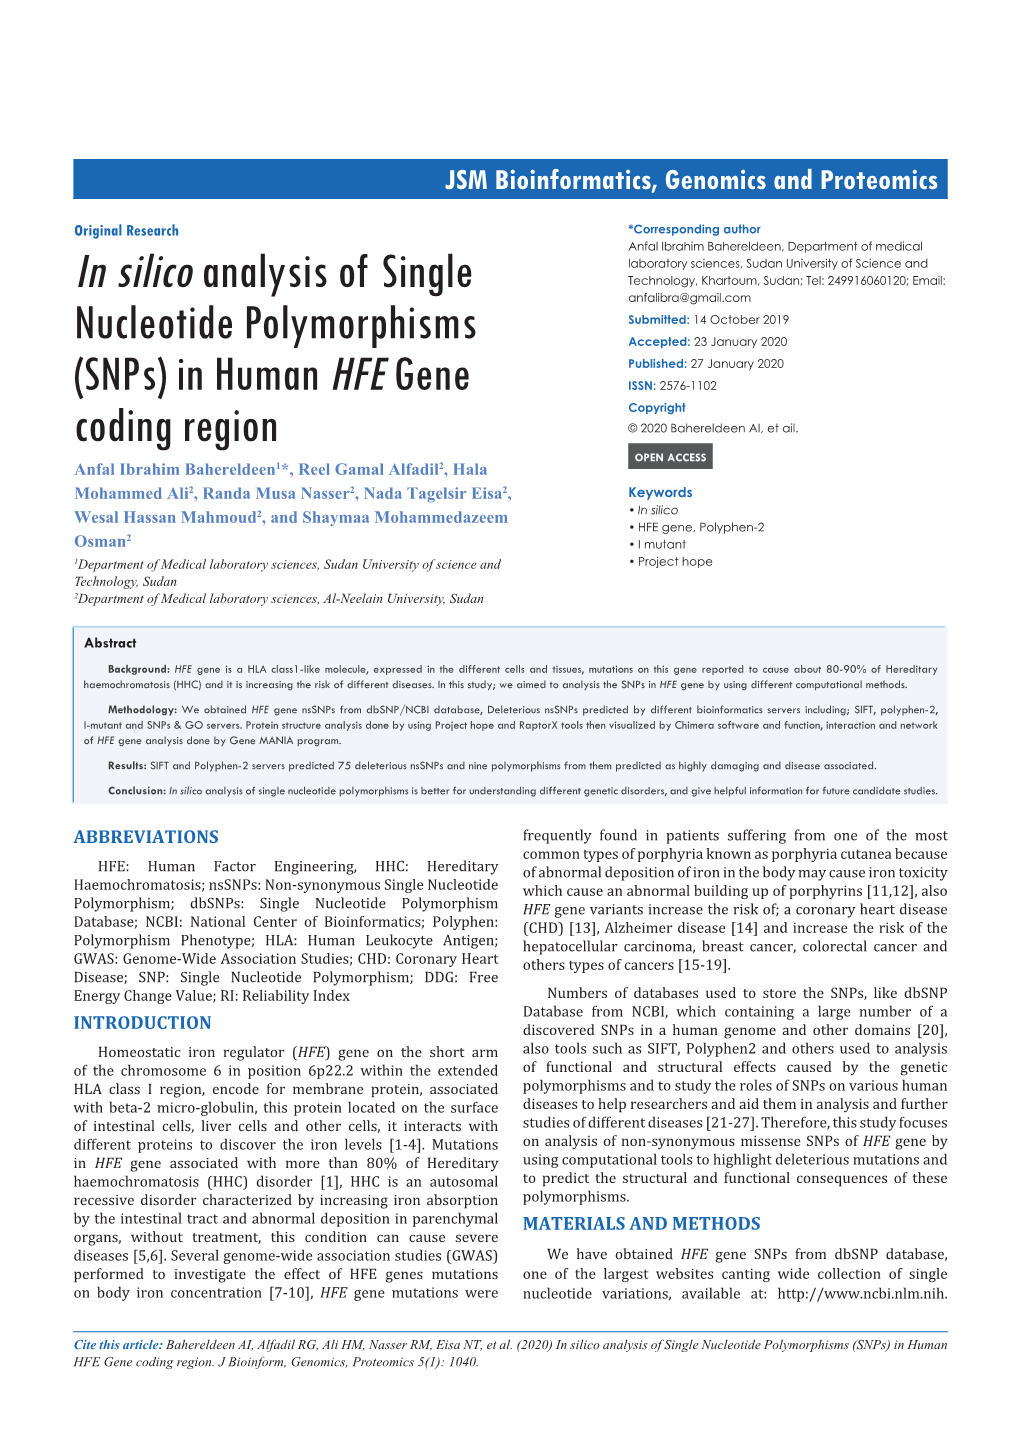 In Silico Analysis of Single Nucleotide Polymorphisms